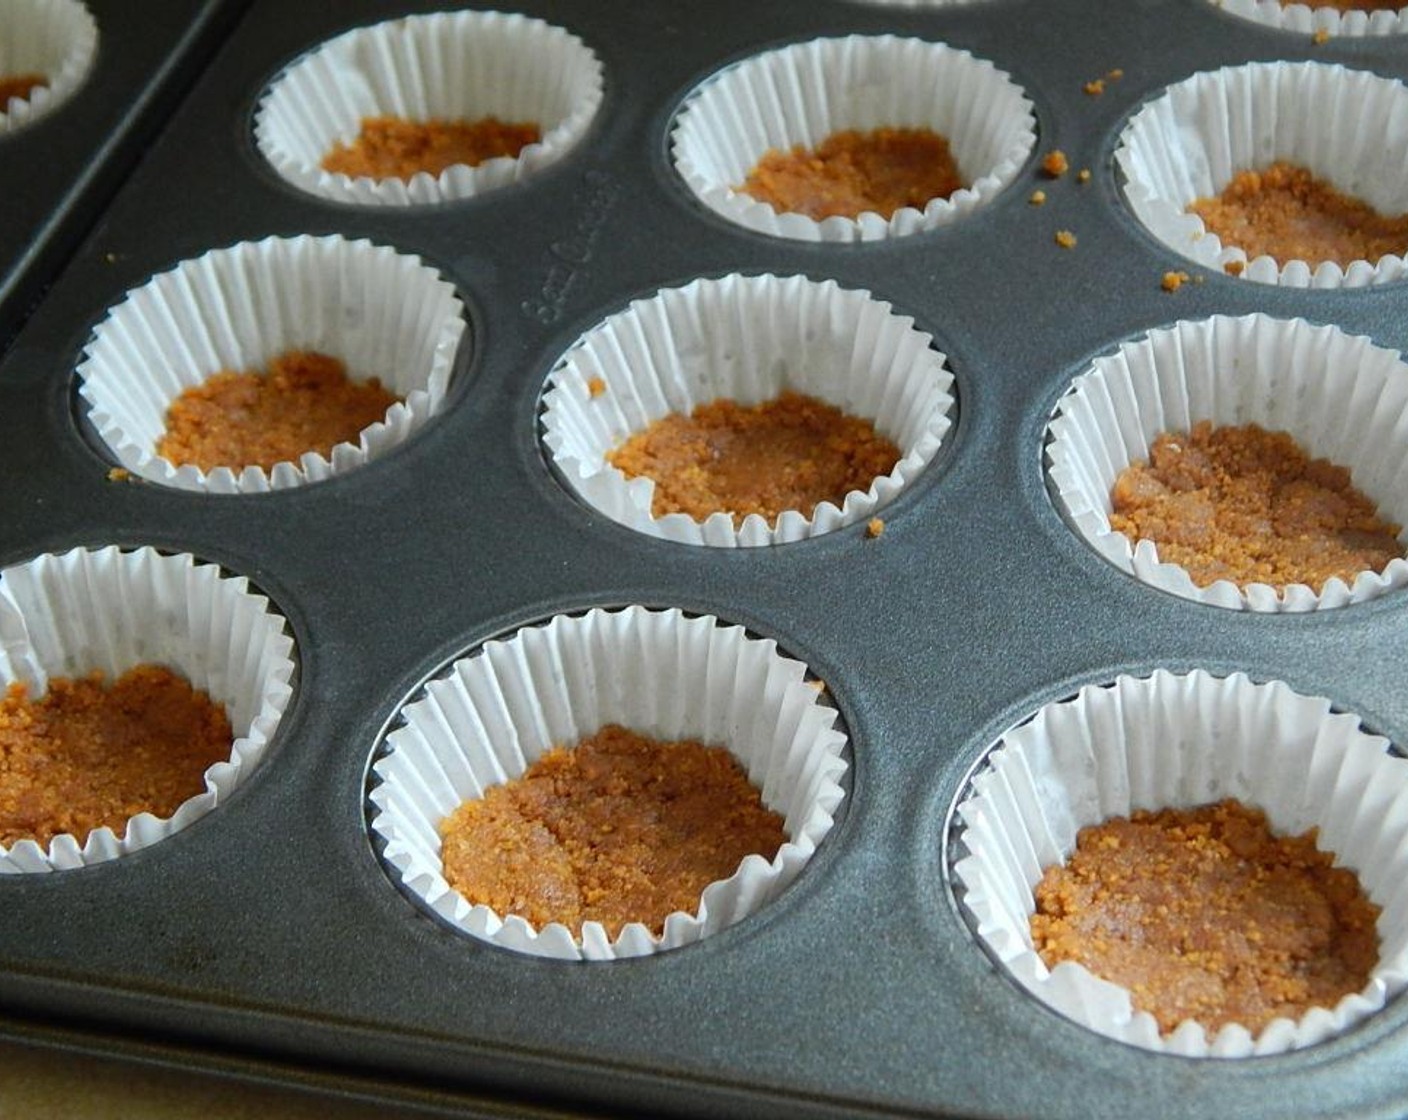 step 2 In a small bowl, mix the Graham Cracker Crumbs (1/2 cup), Light Margarine (1 1/2 Tbsp), and Ground Cinnamon (1/2 tsp) together. Divide over your 24 mini liners and pat down.